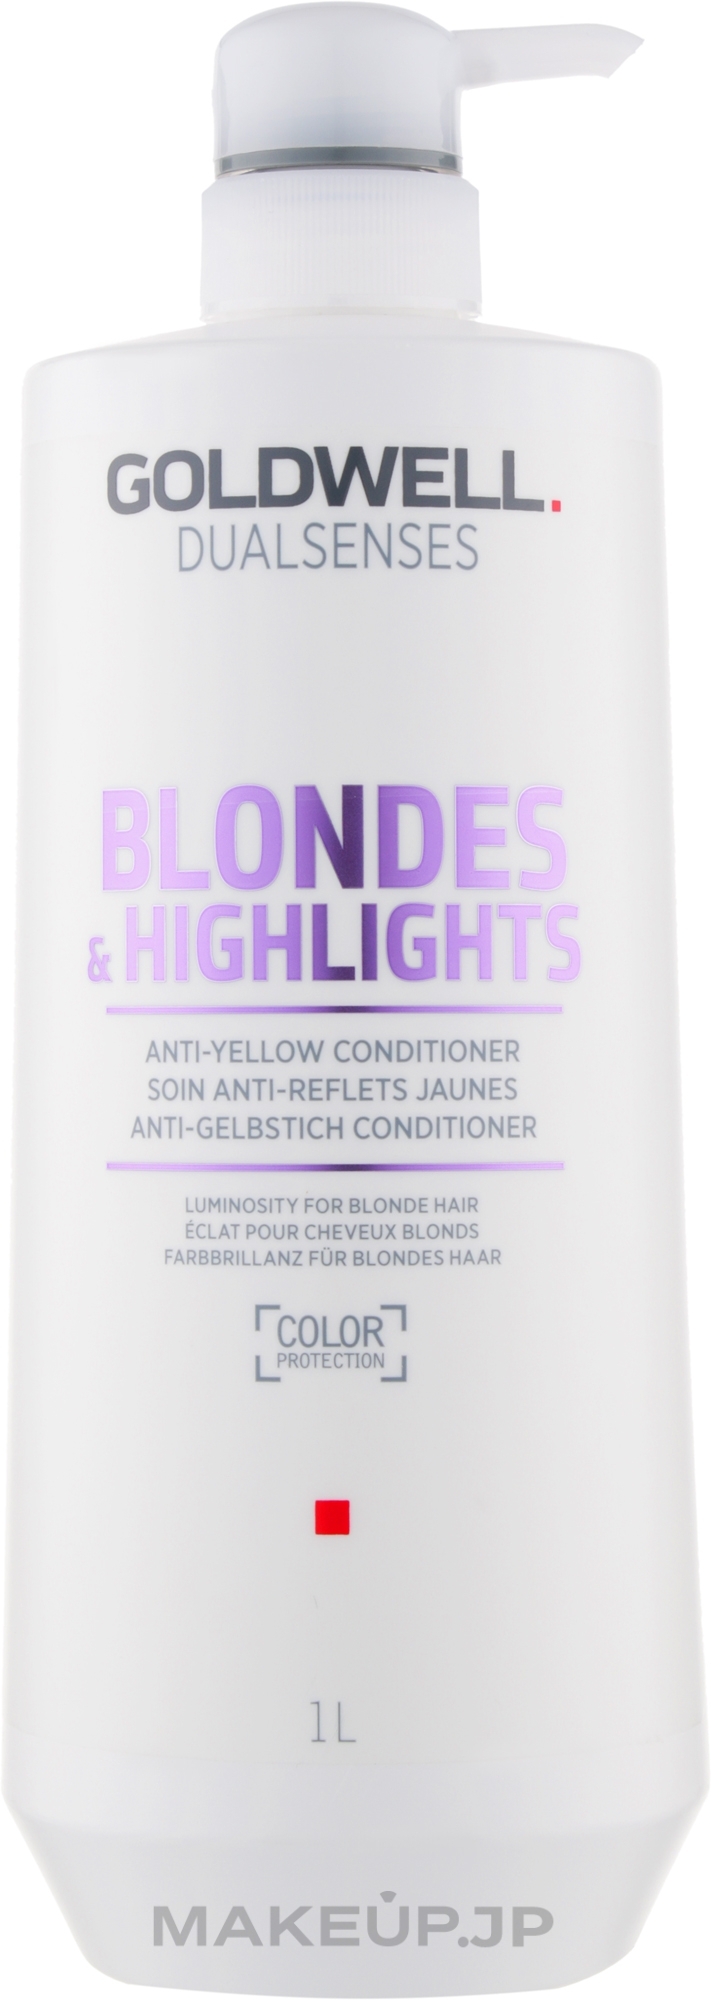 Anti-Yellow Conditioner for Blonde Hair - Goldwell Dualsenses Blondes & Highlights Anti-Yellow Conditioner — photo 1000 ml